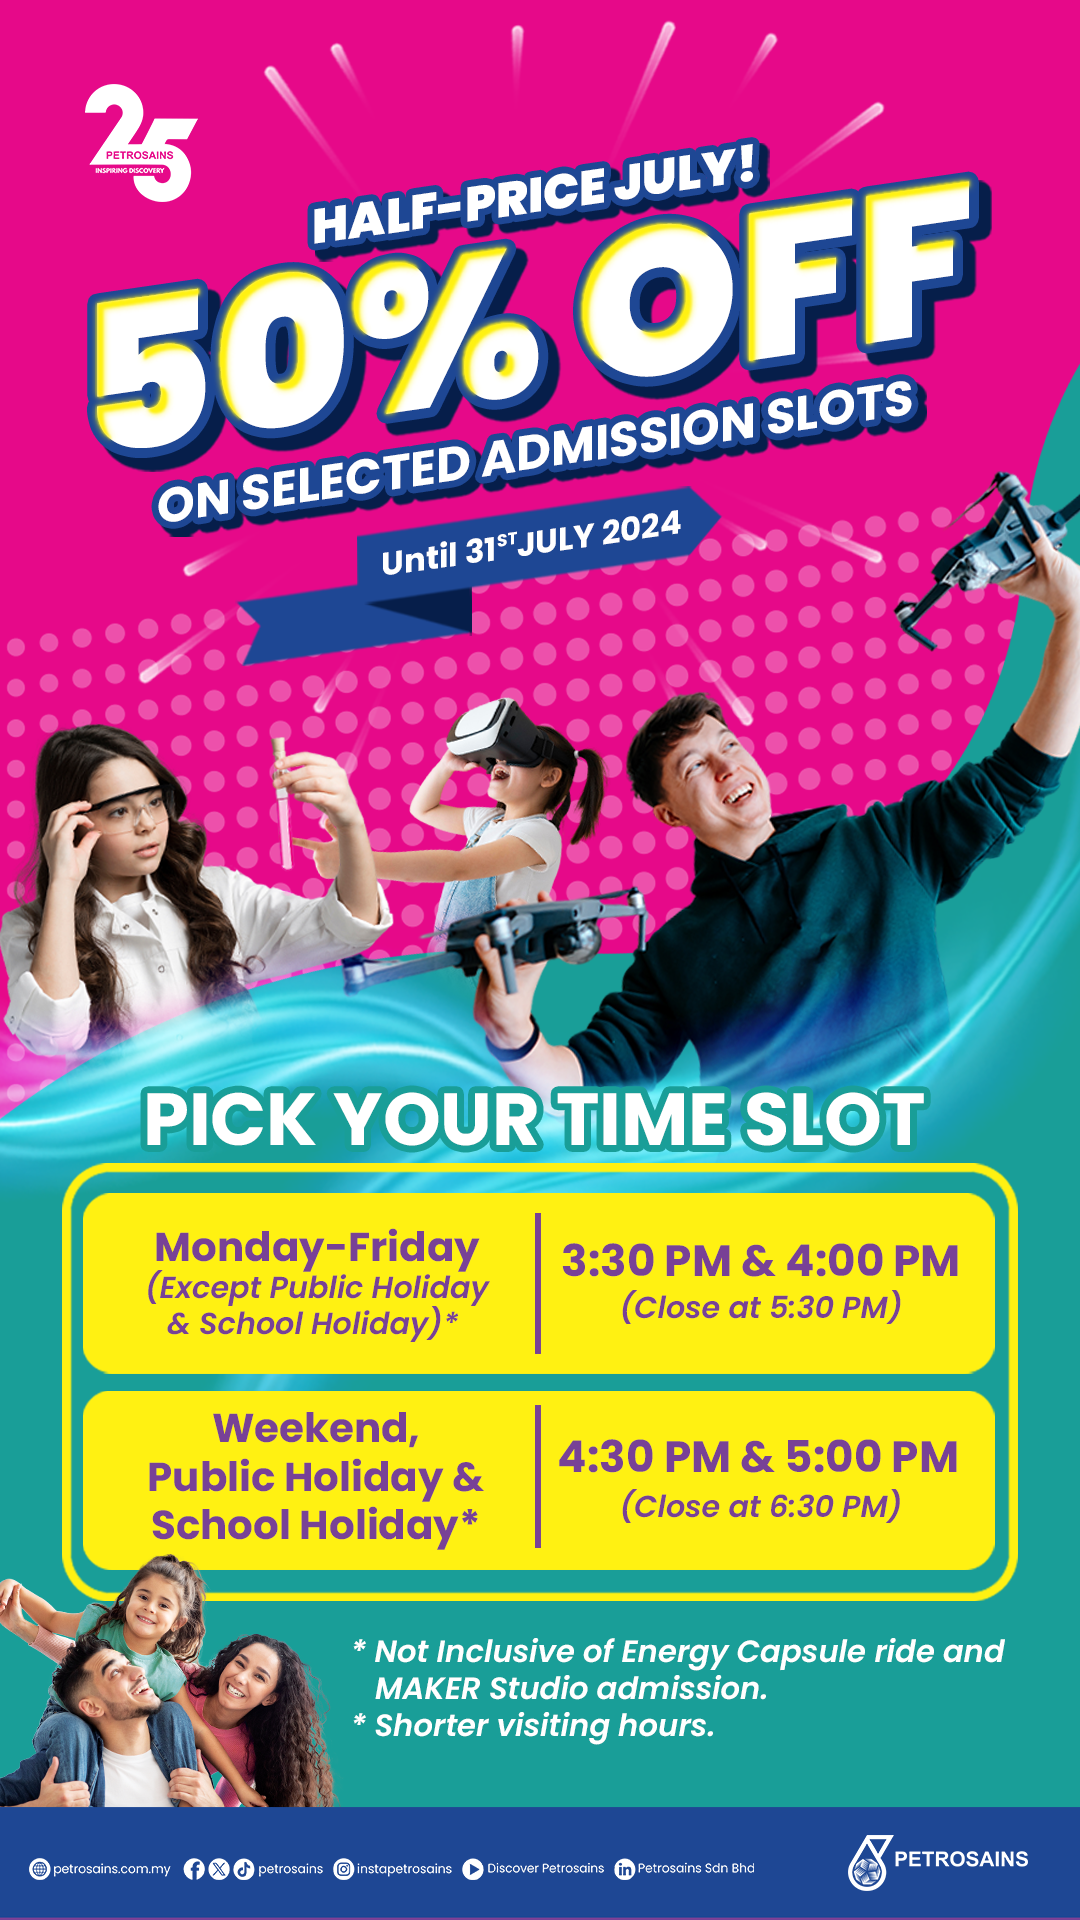 50% OFF on Selected Admission Slots at Petrosains